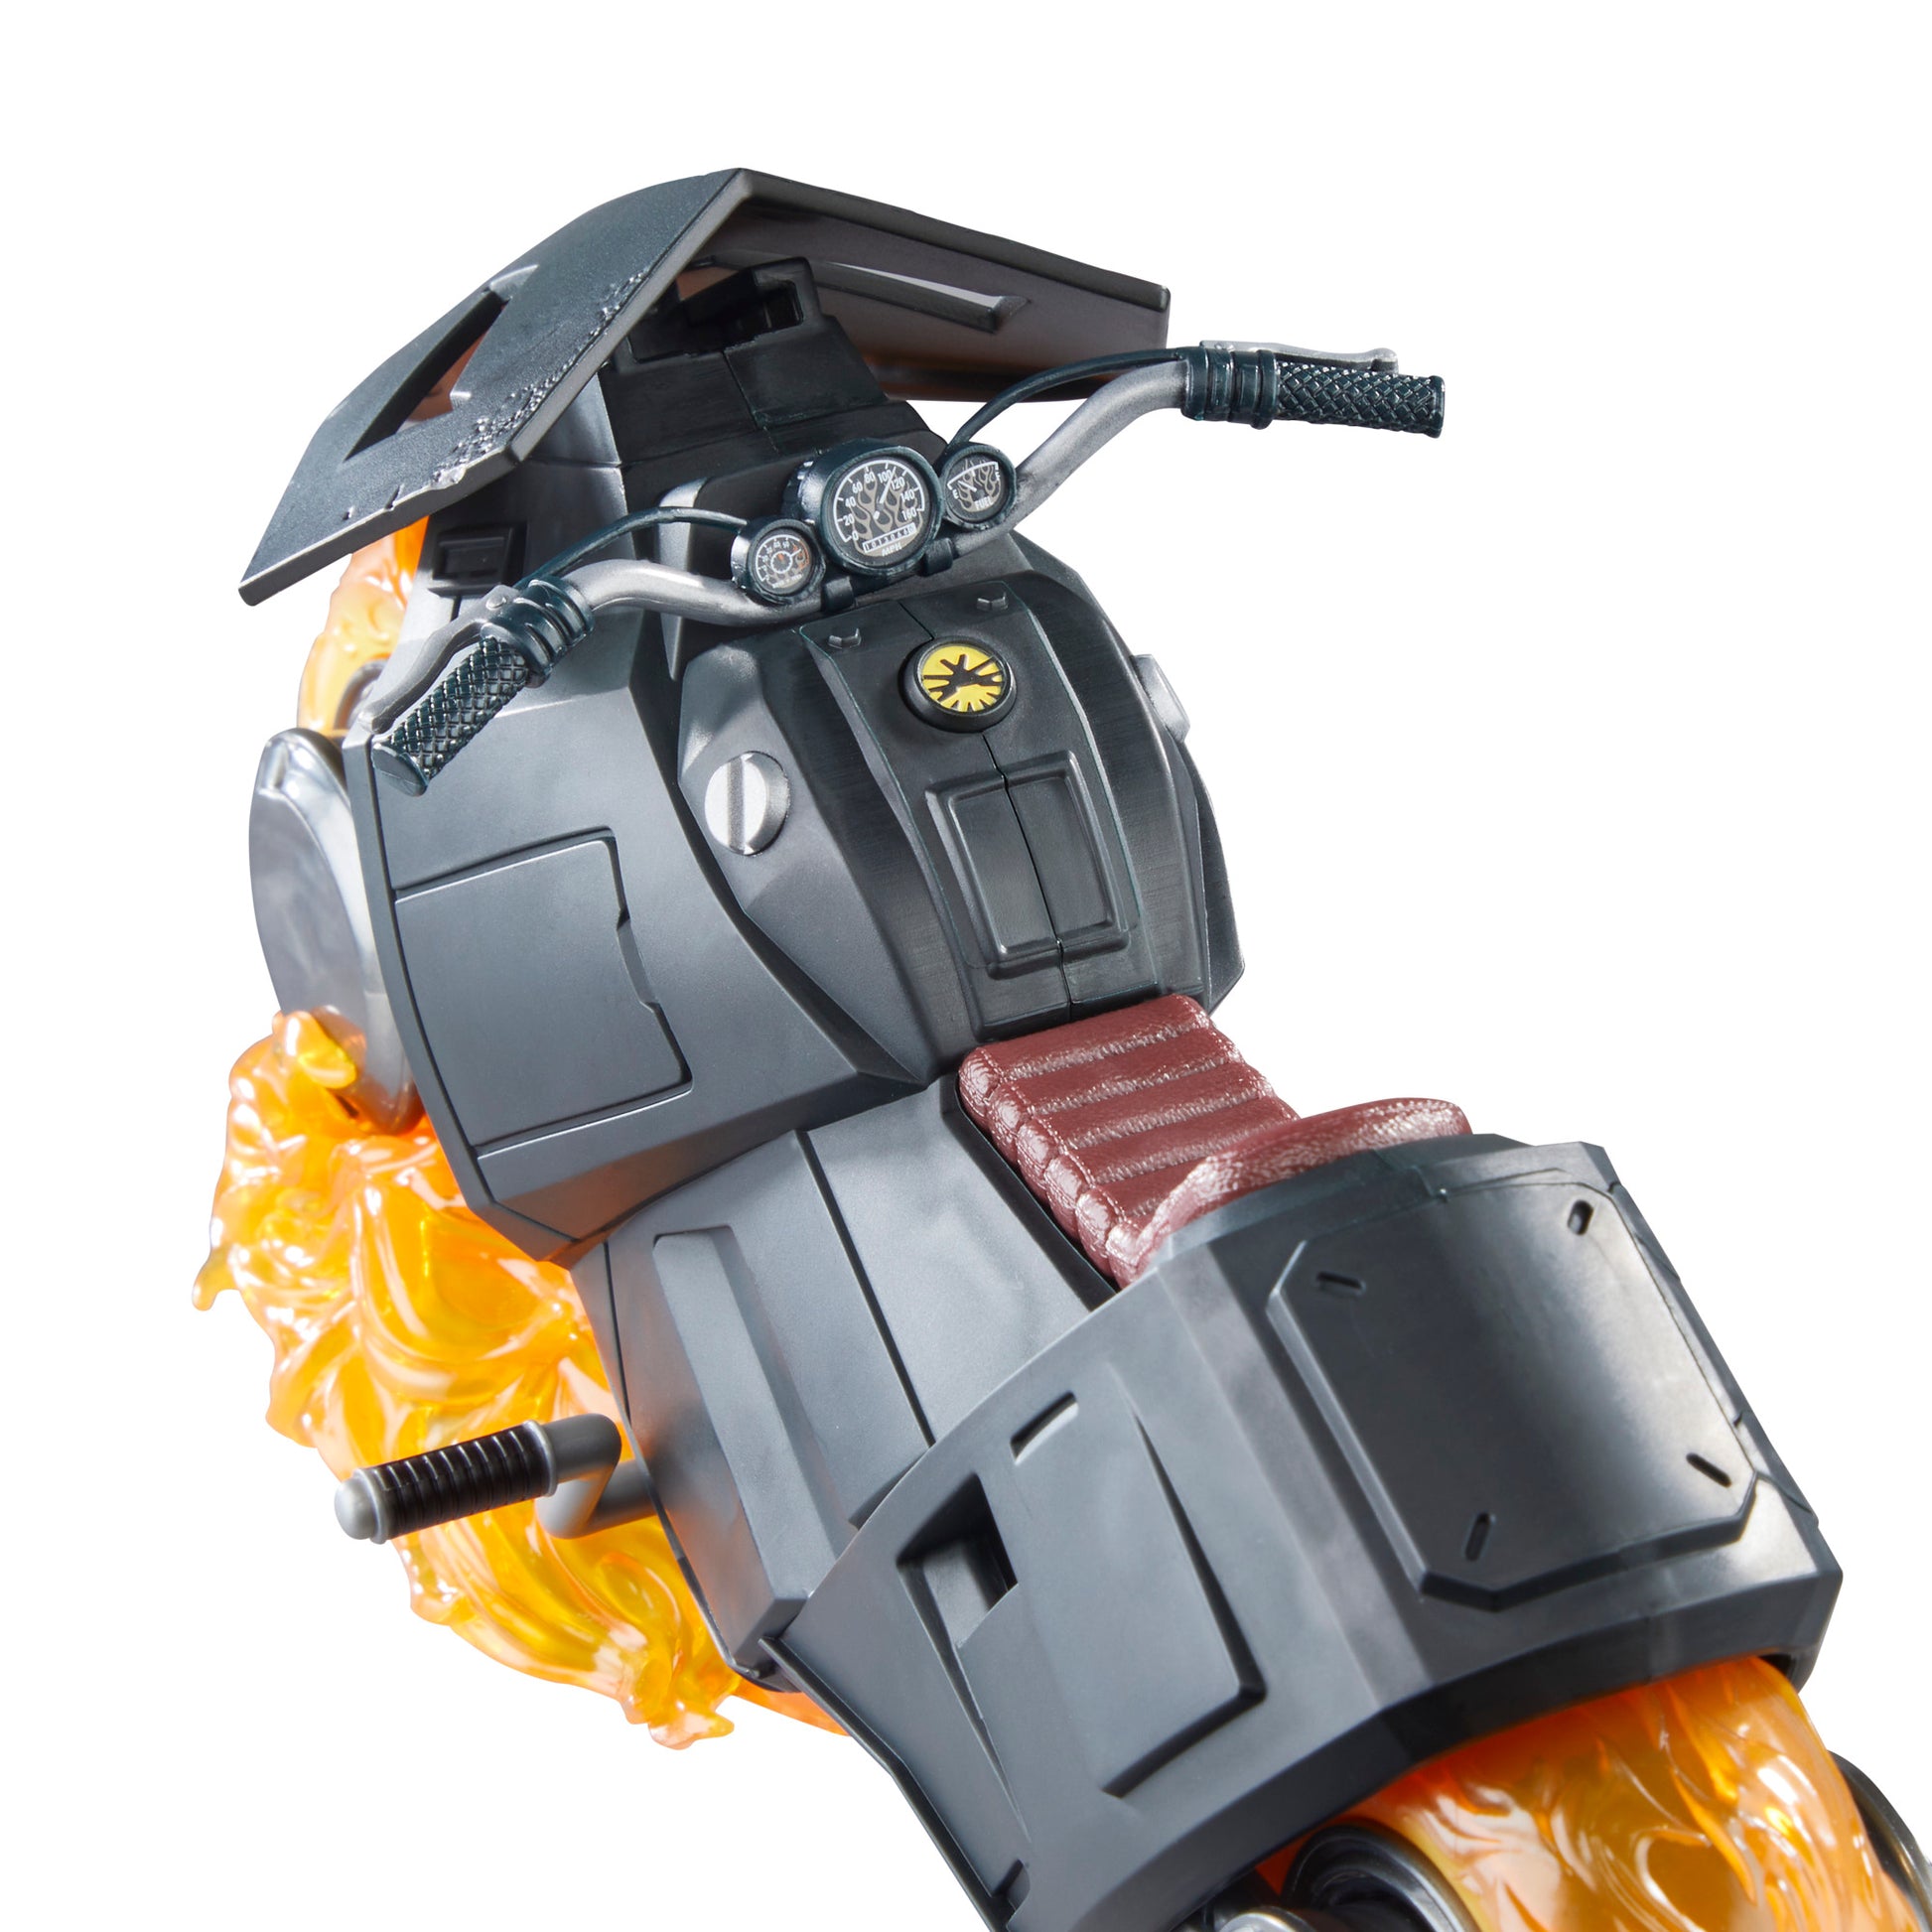 Marvel Legends Series Ghost Rider, 6" Comics Collectible Action Figure with Motorcycle